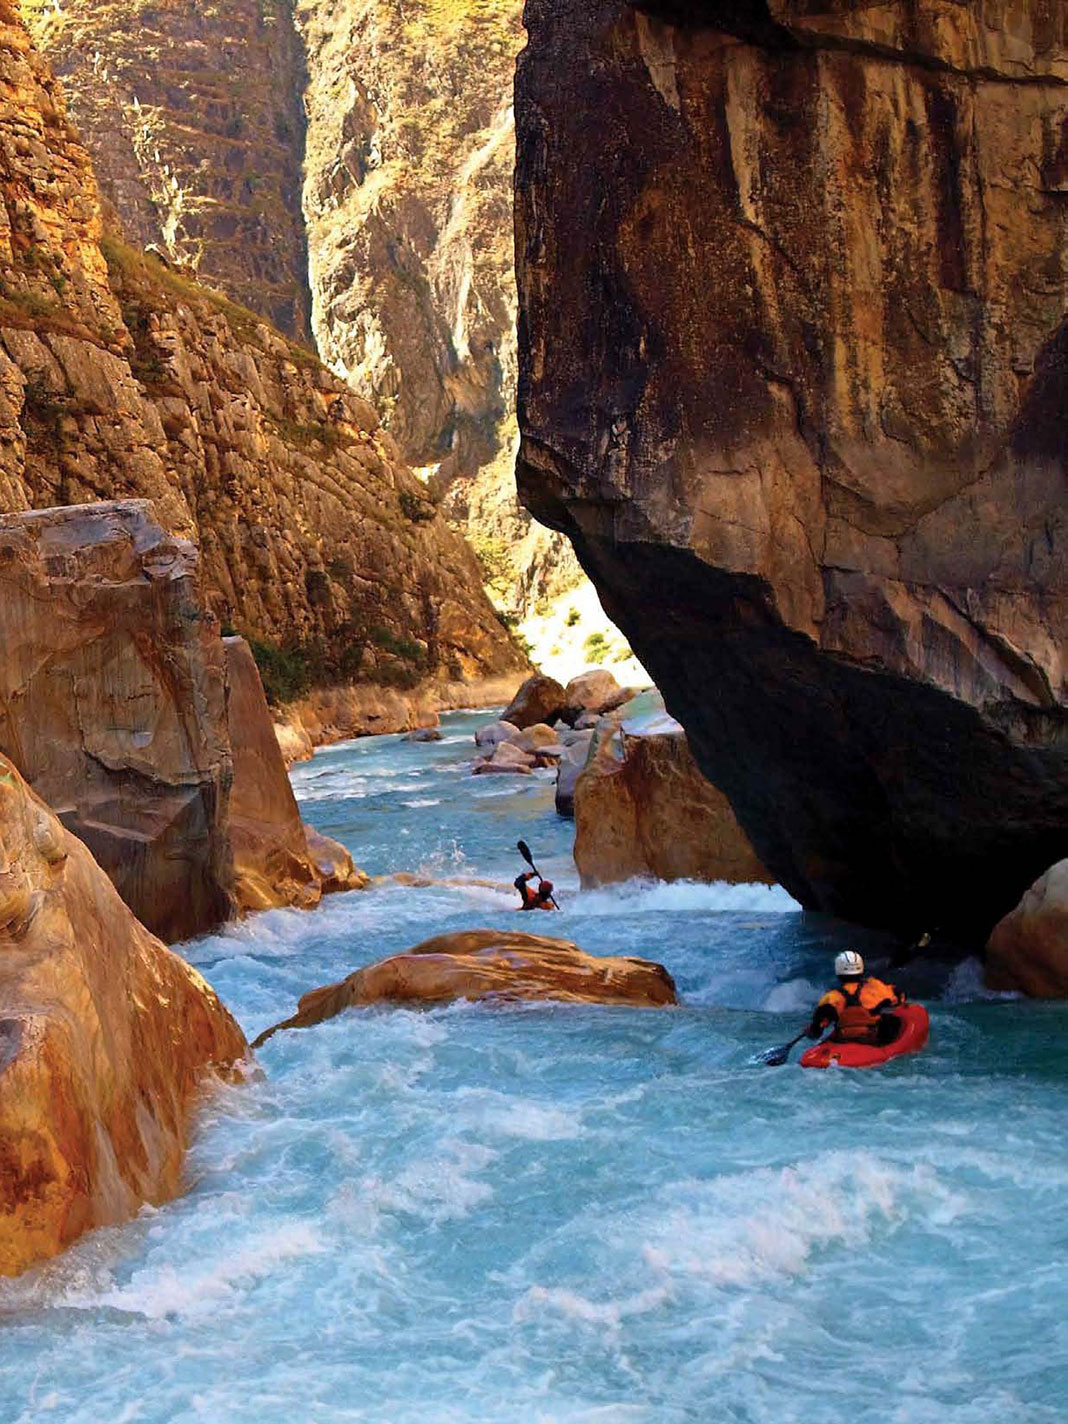 two whitewater kayakers paddle through a rocky, monsoon-flooded canyon in Nepal's Himalaya Mountains